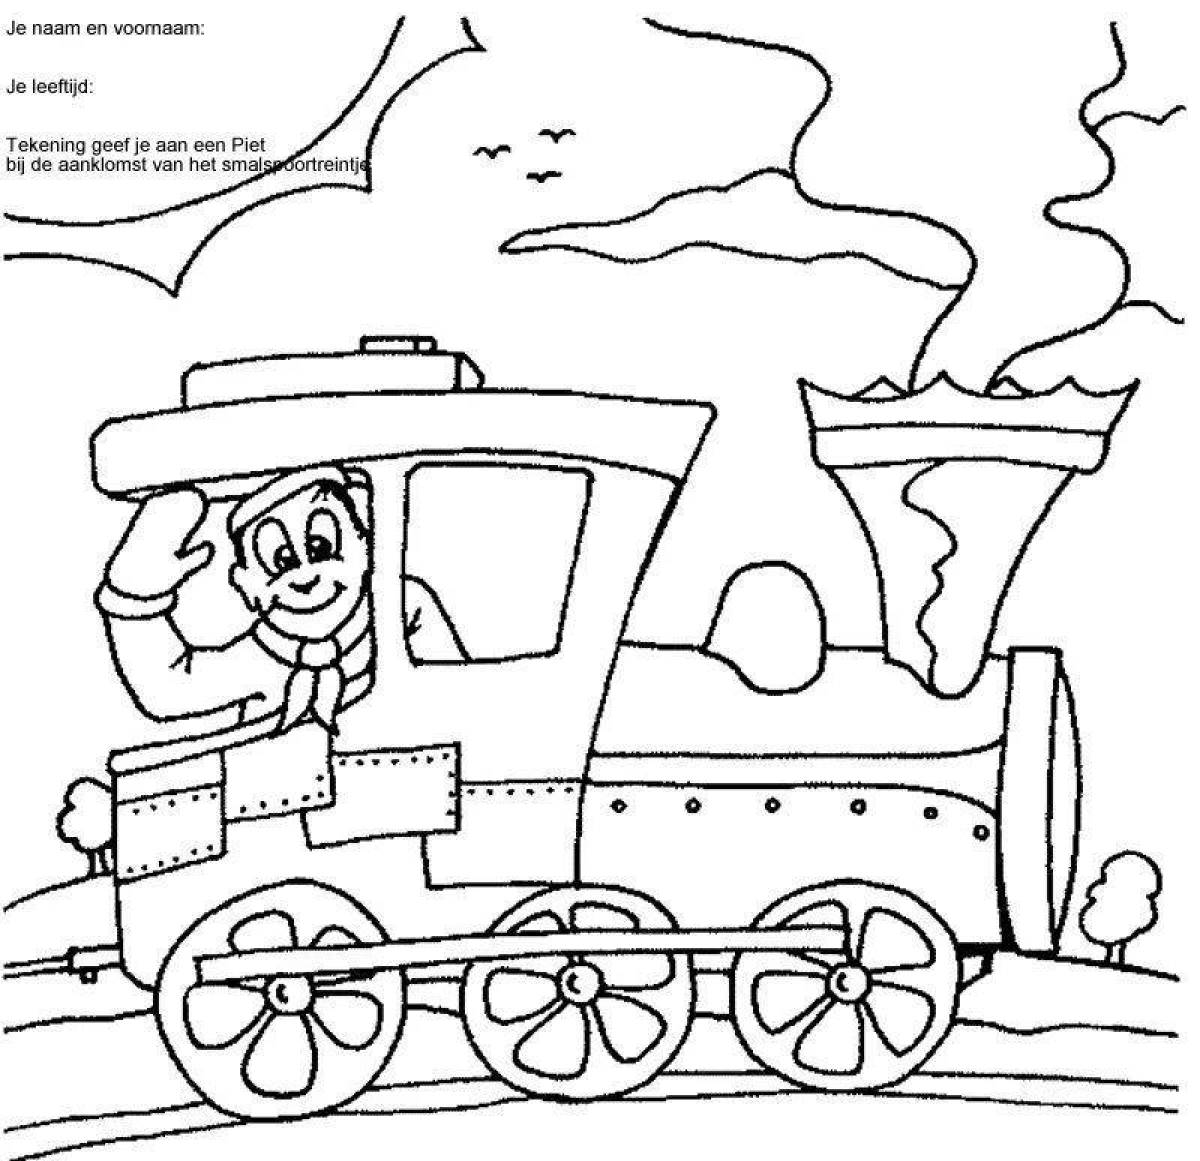 Creative transport profession coloring book for children 5-6 years old